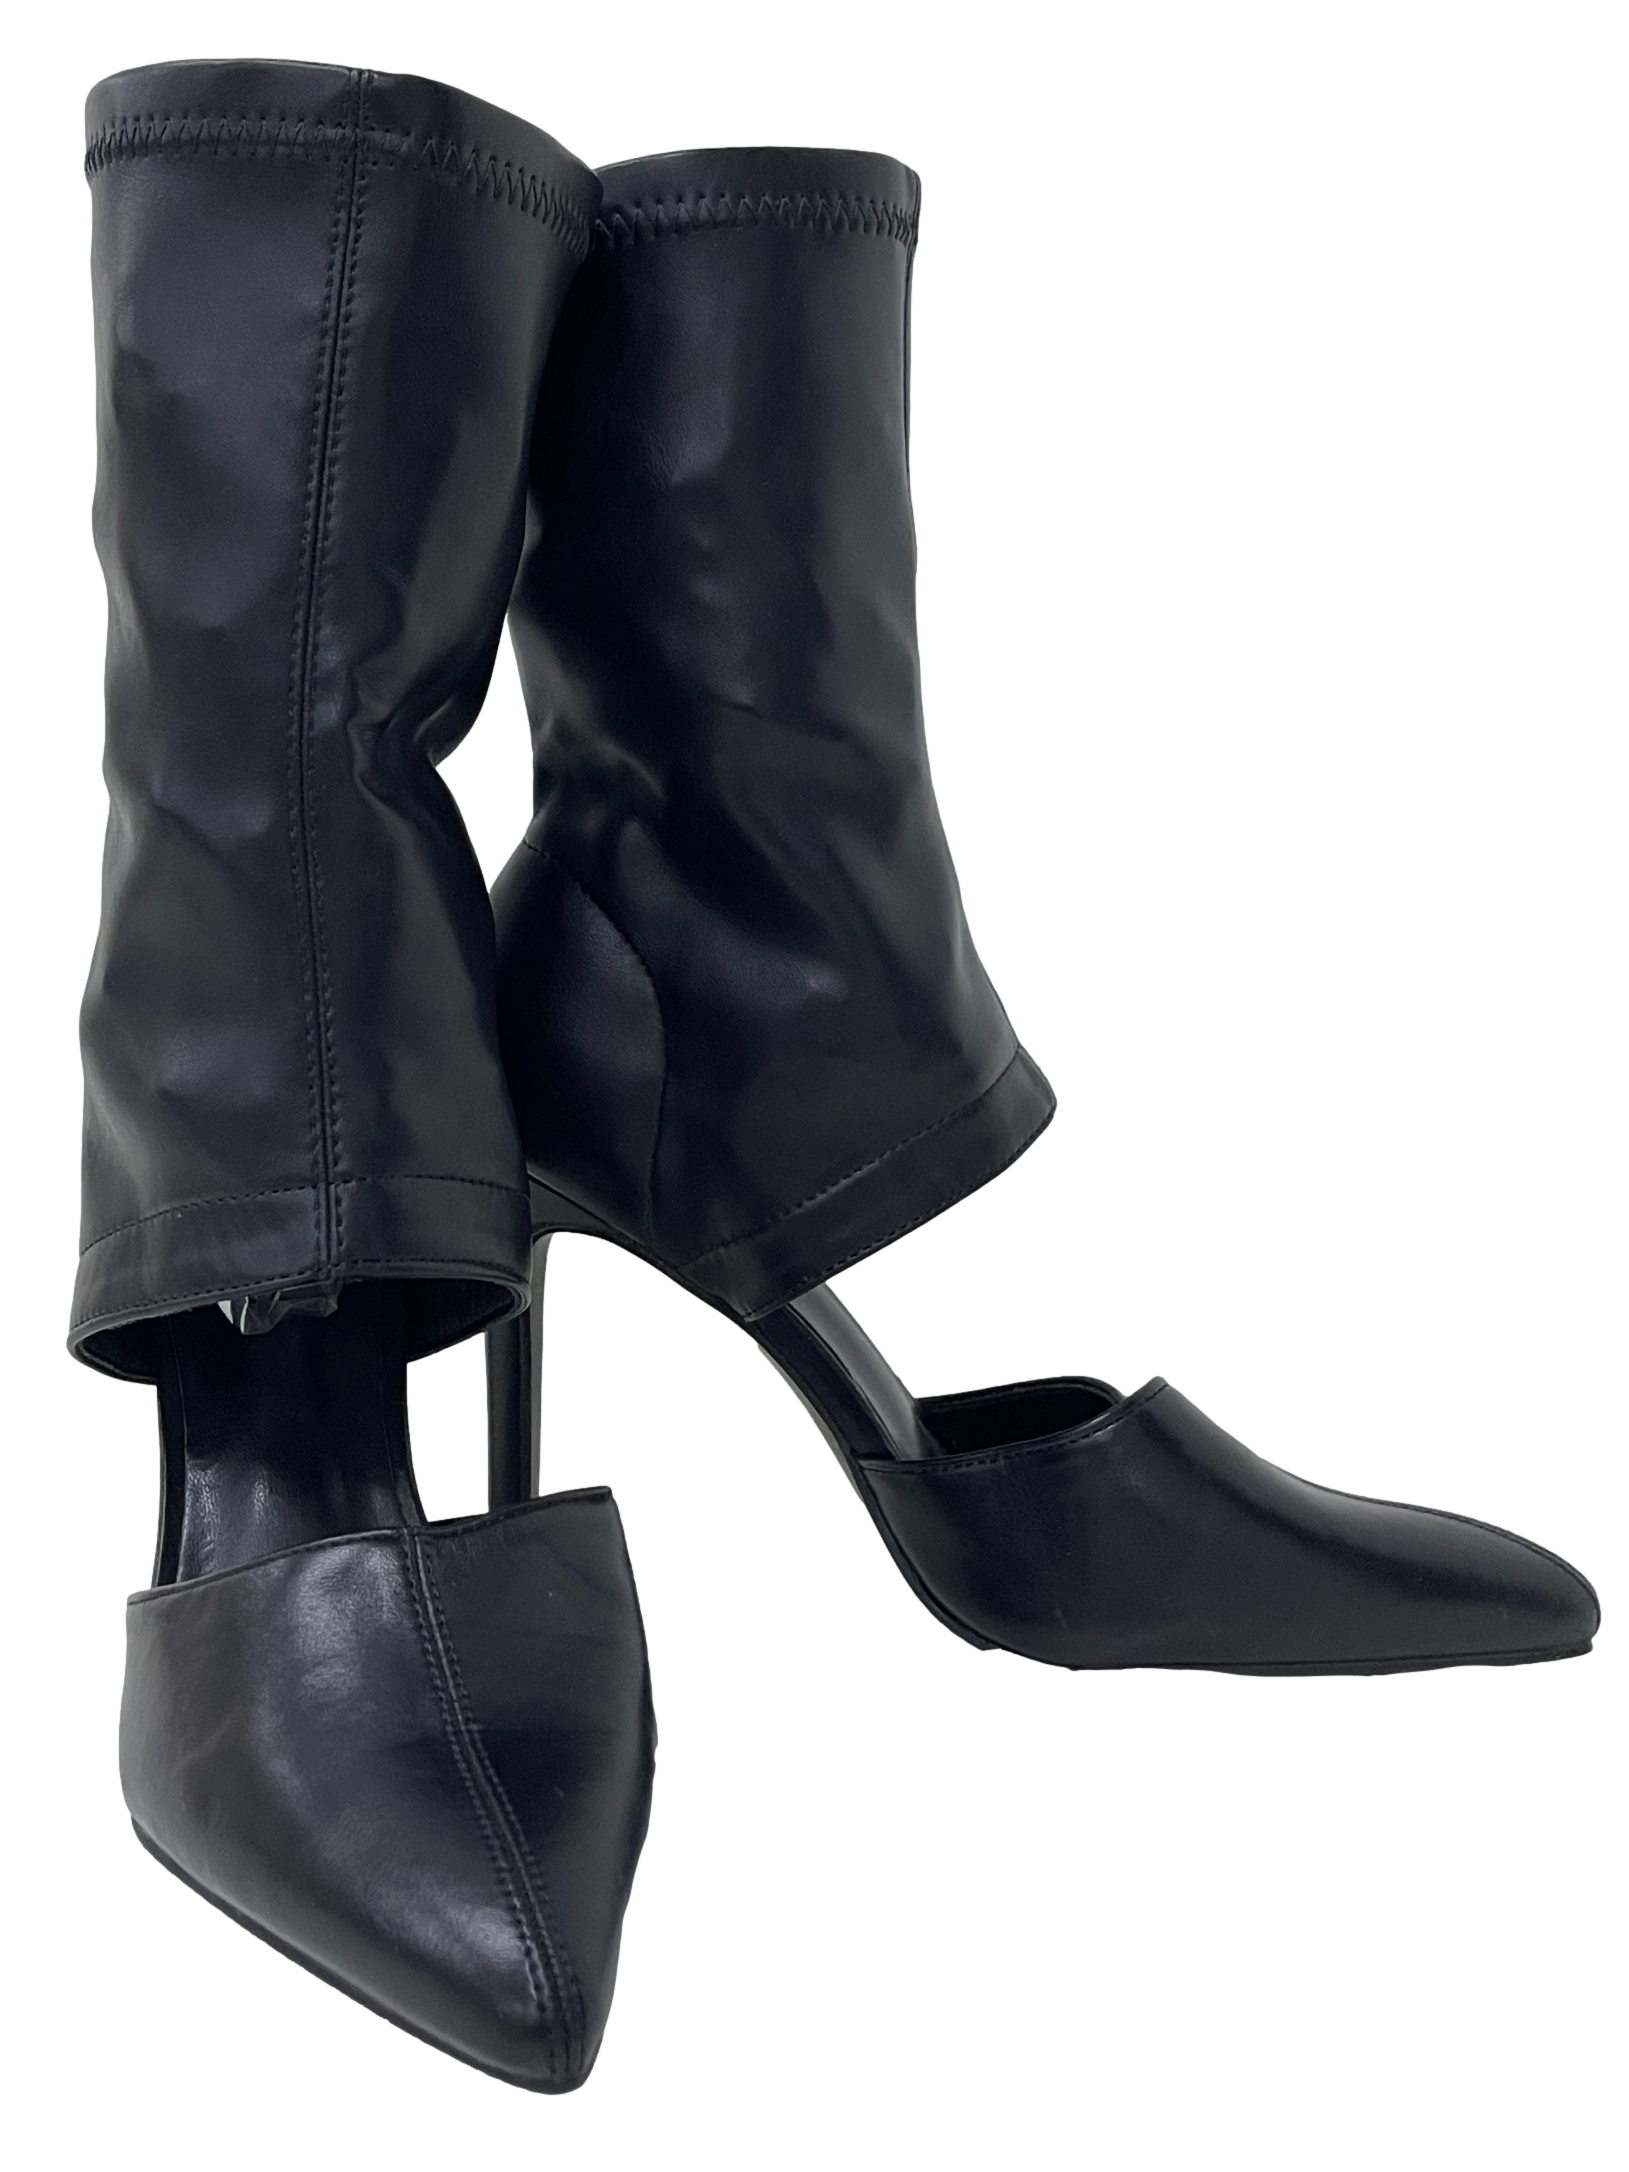 Black Leather Heels Boots